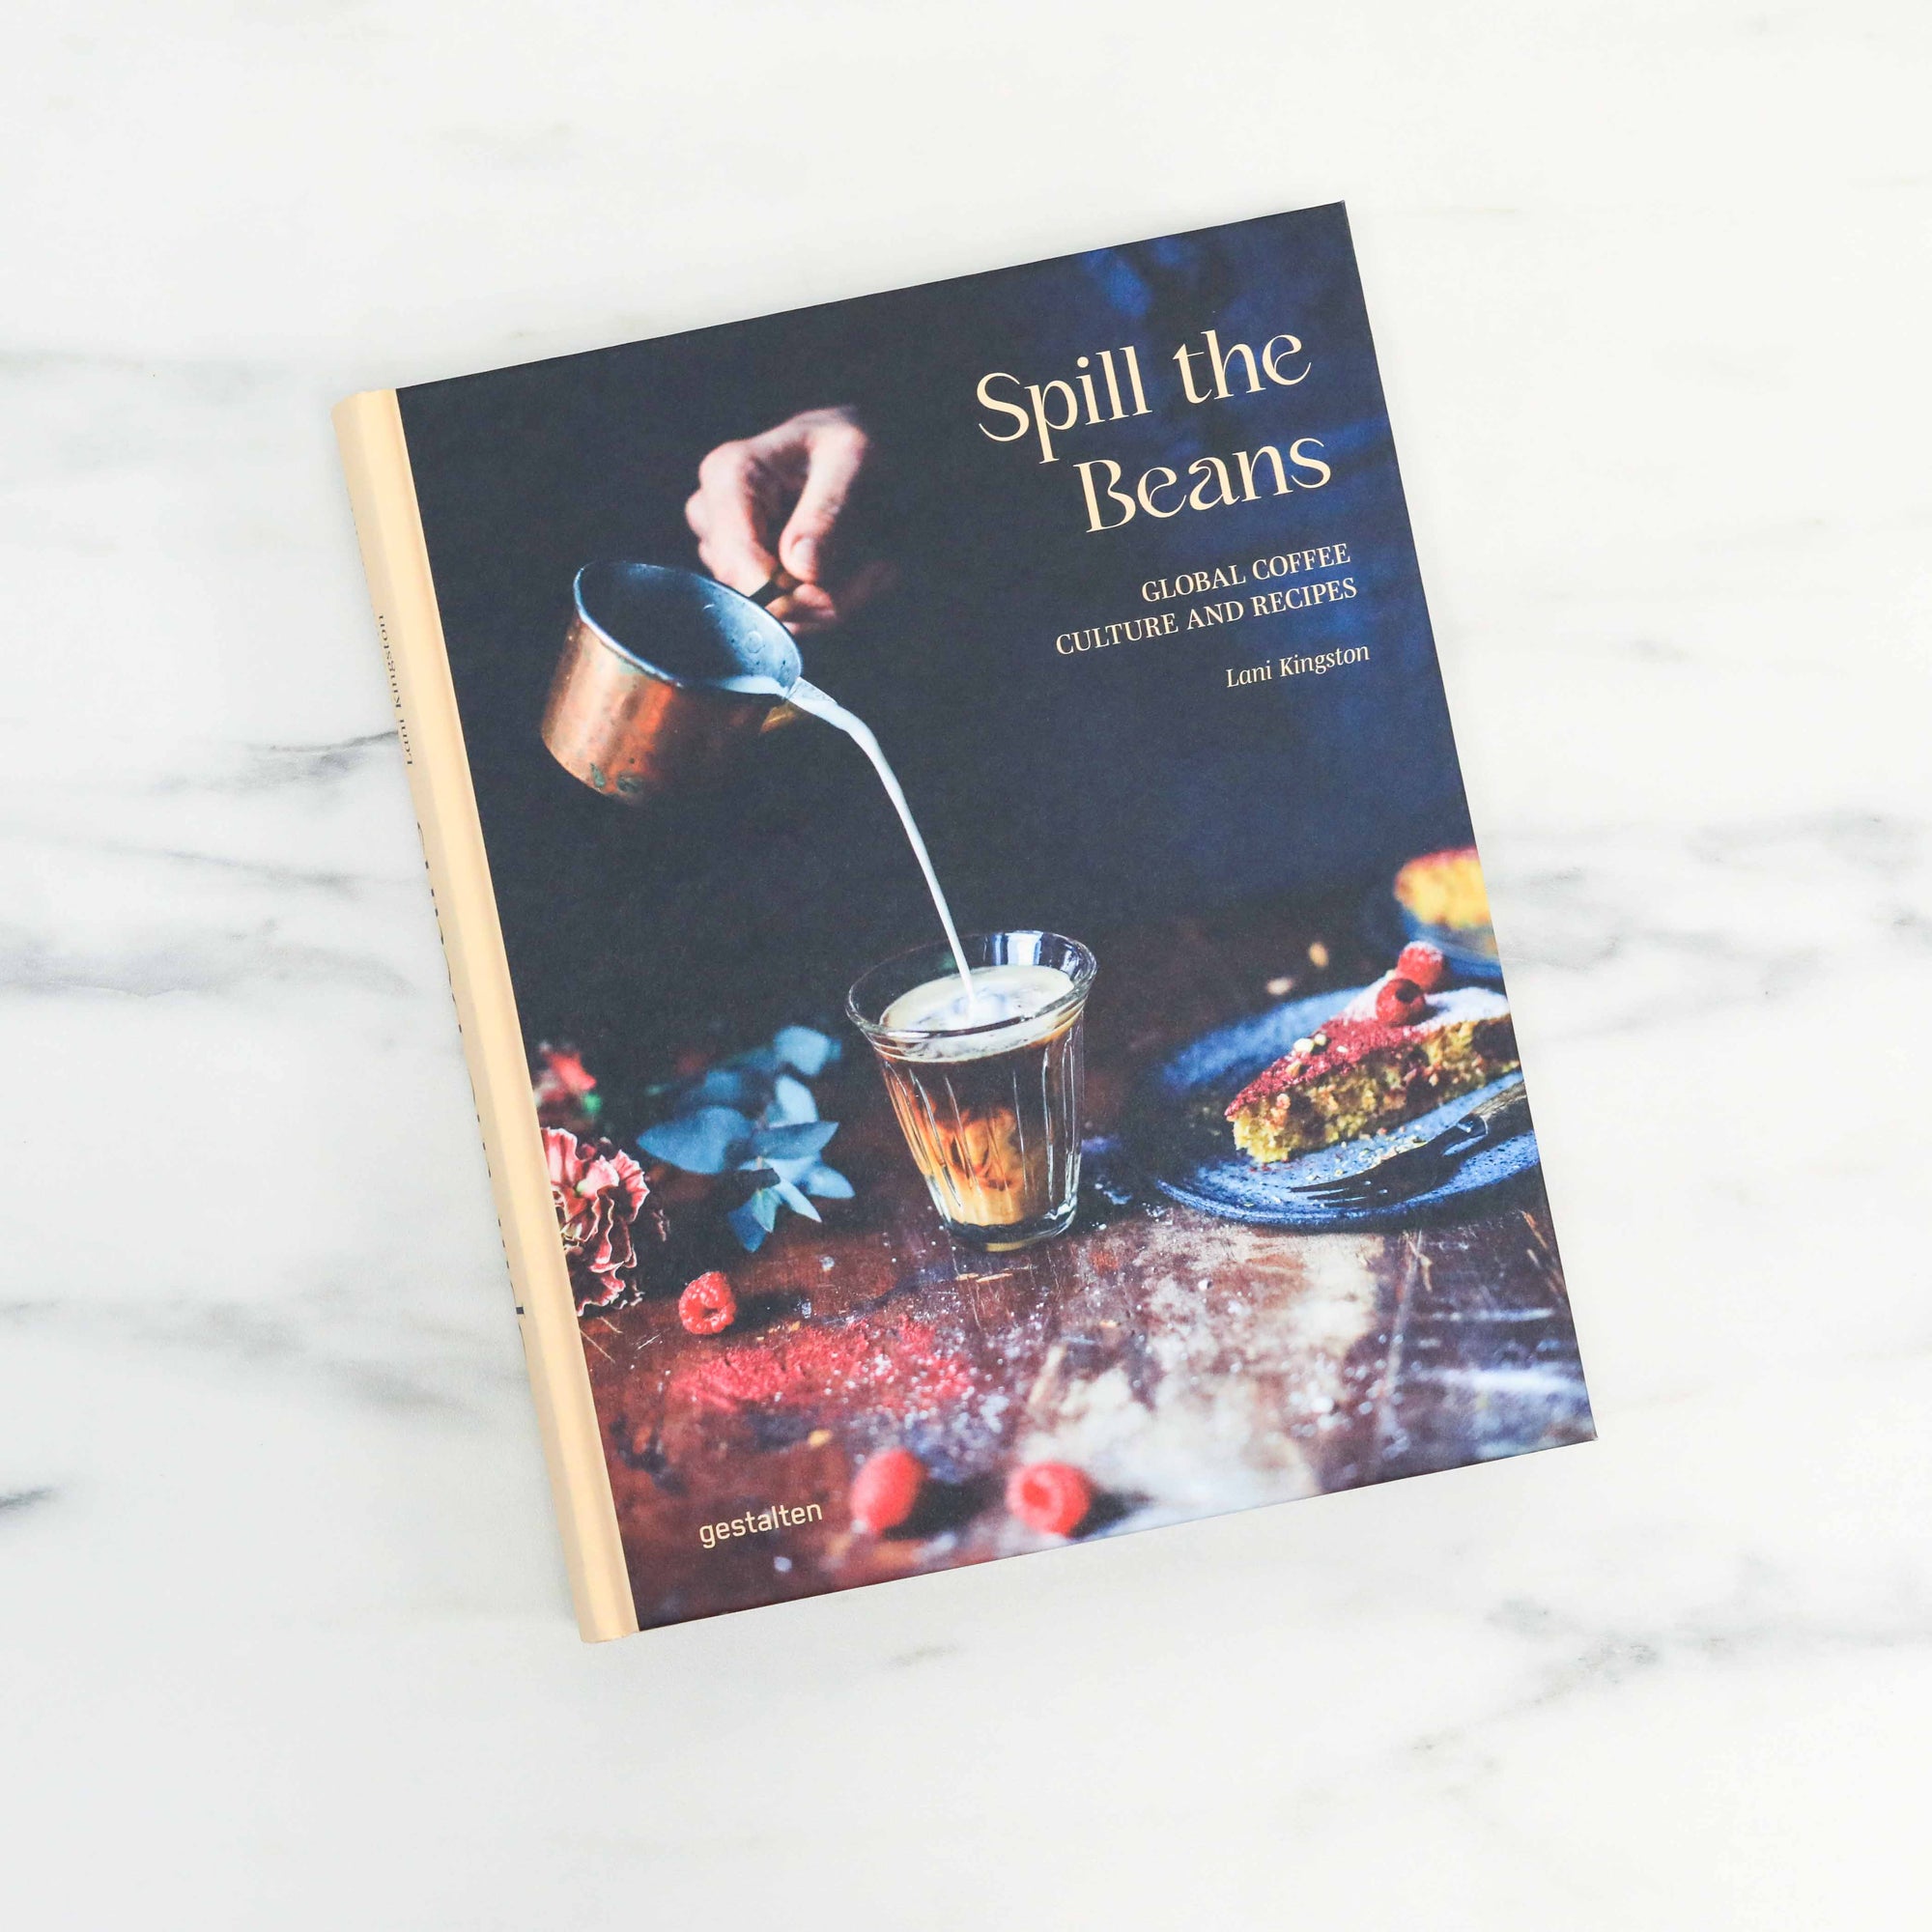 "Spill The Beans: Global Coffee Culture and Recipes" by Lani Kingston